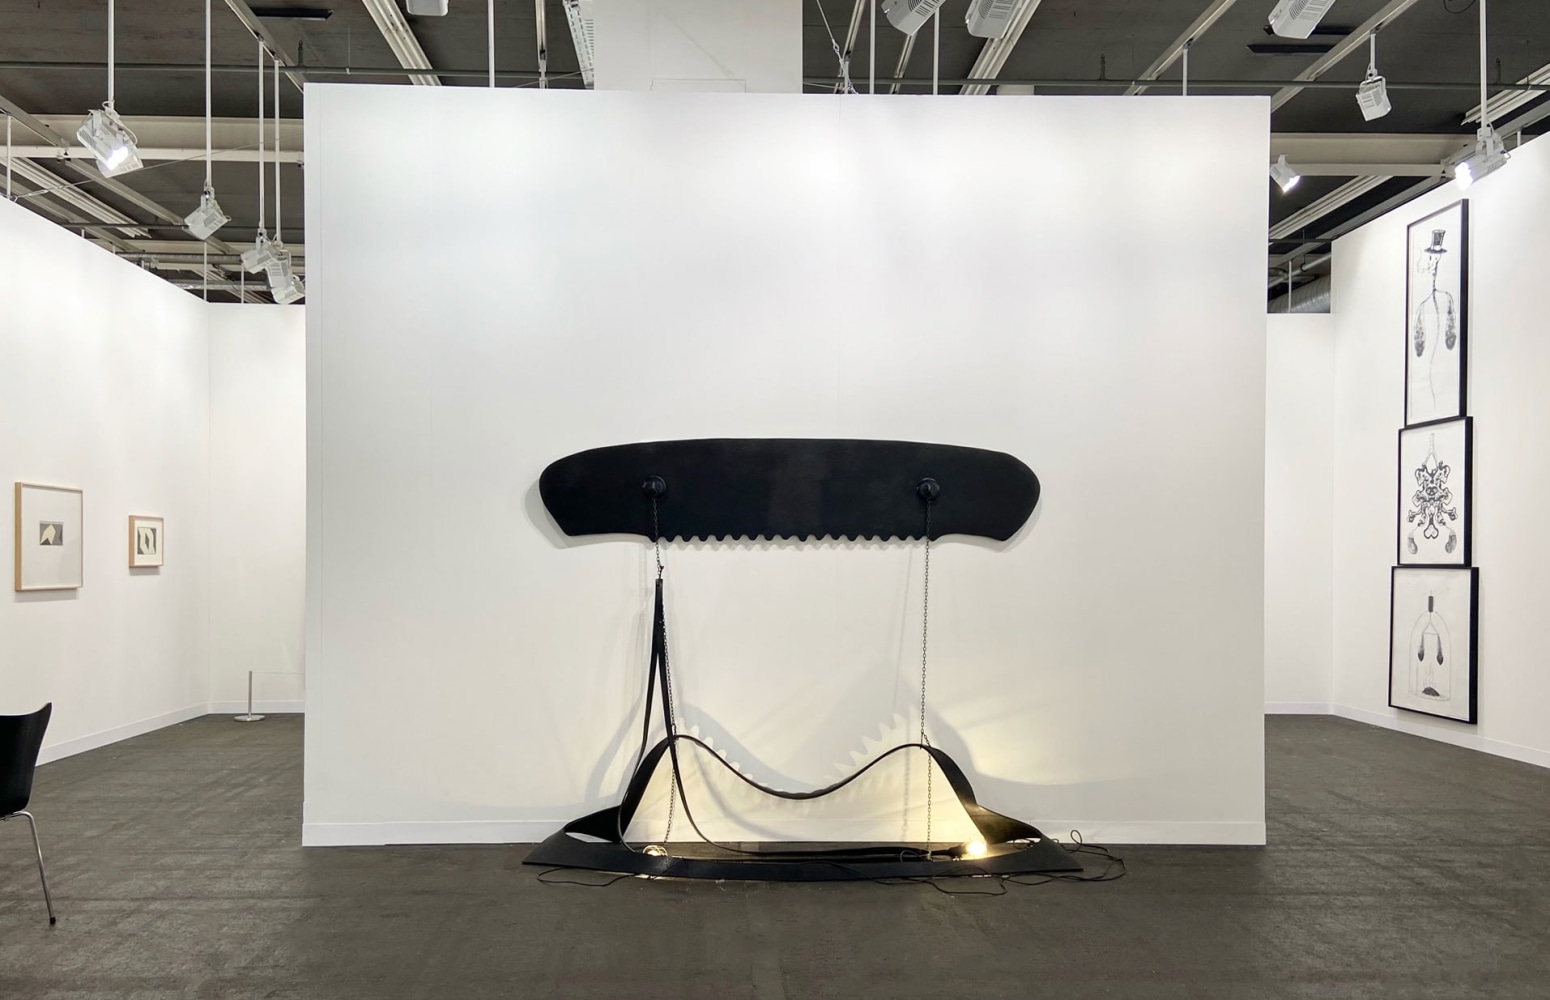 Luhring Augustine&amp;nbsp;
Art Basel 2023, Booth A4
Installation view
2023
Photo: Junpei Murao